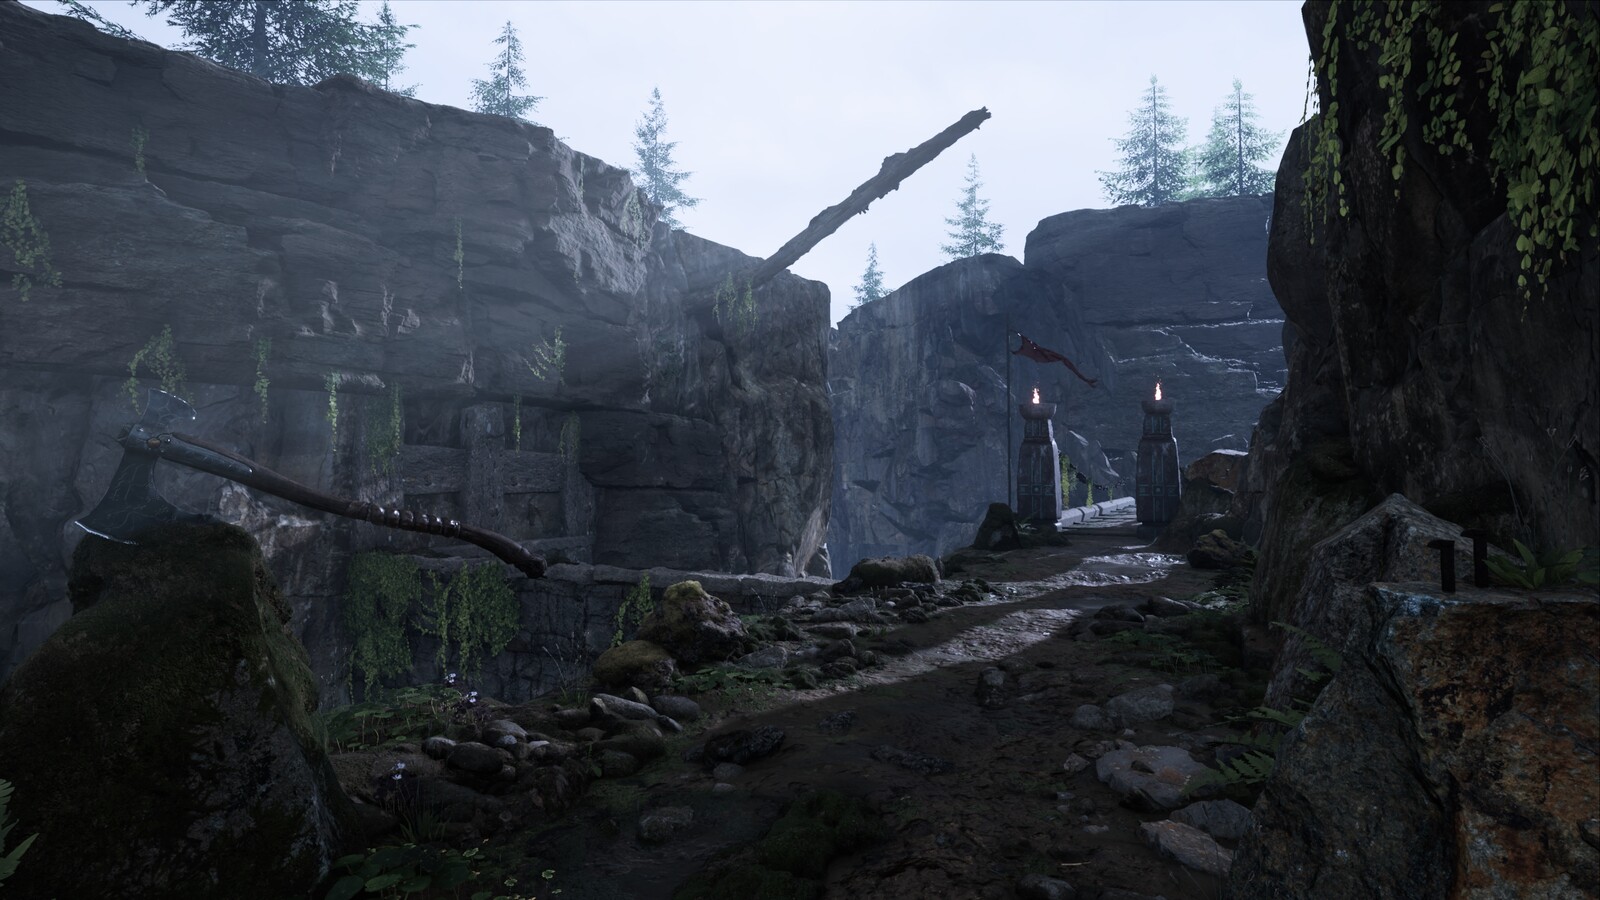 The result, created in UE4 using Megascans and a bit of elbow grease :)